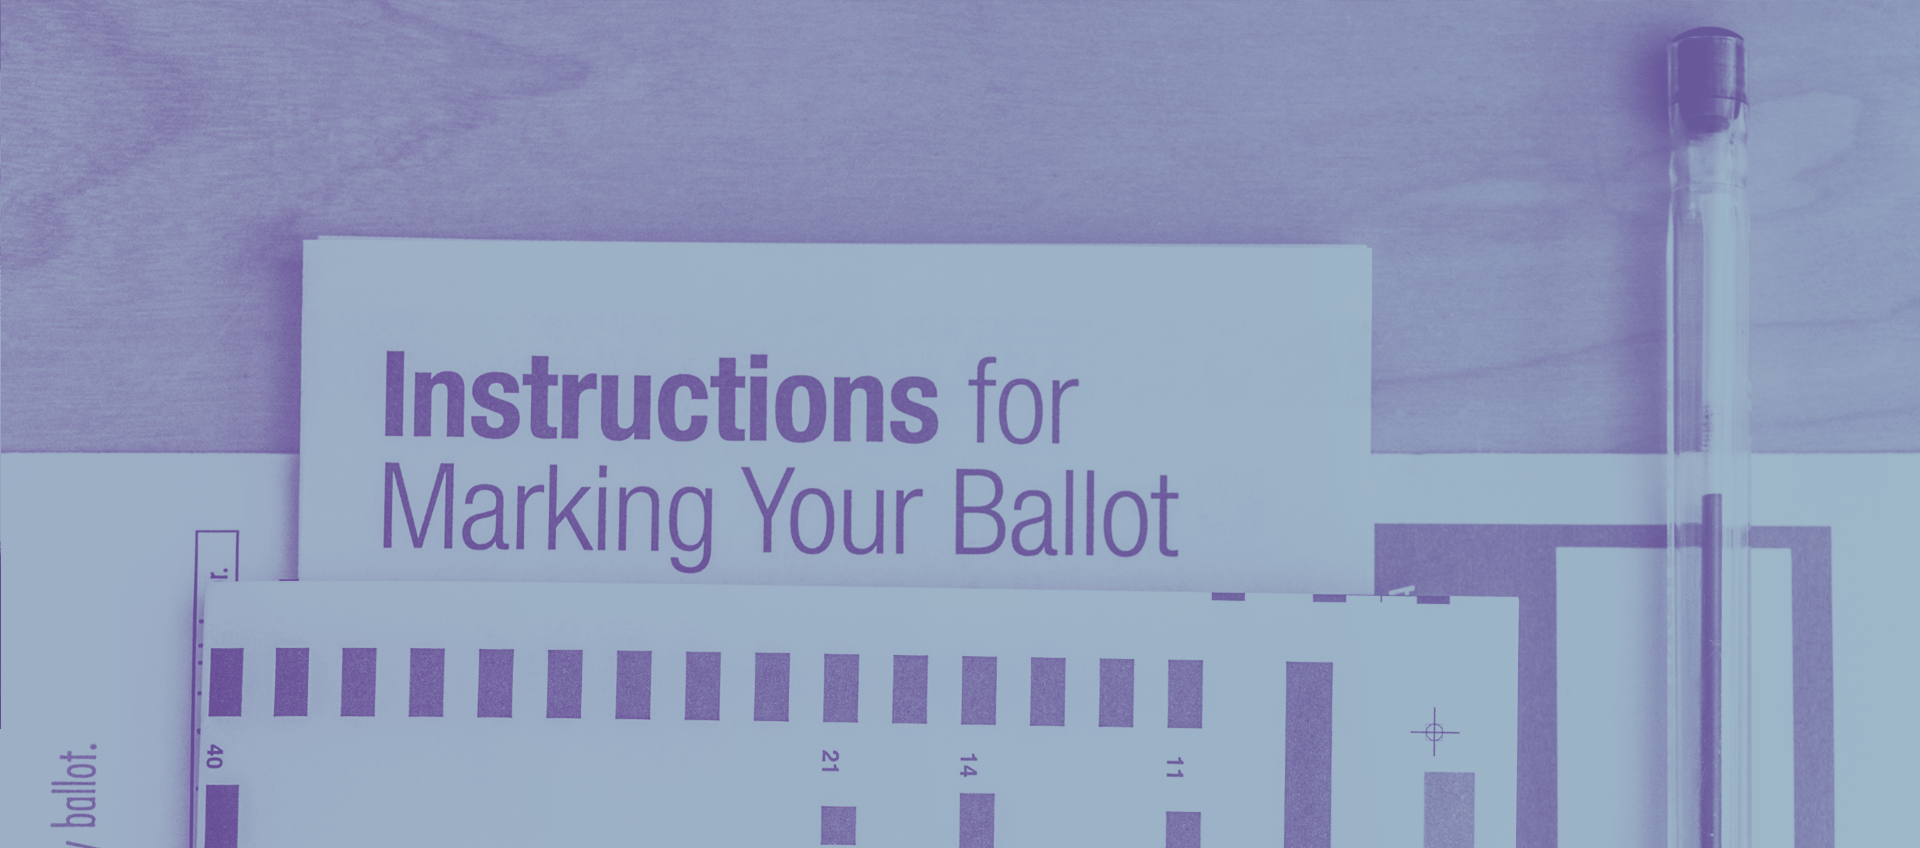 Instructions for marking your ballot